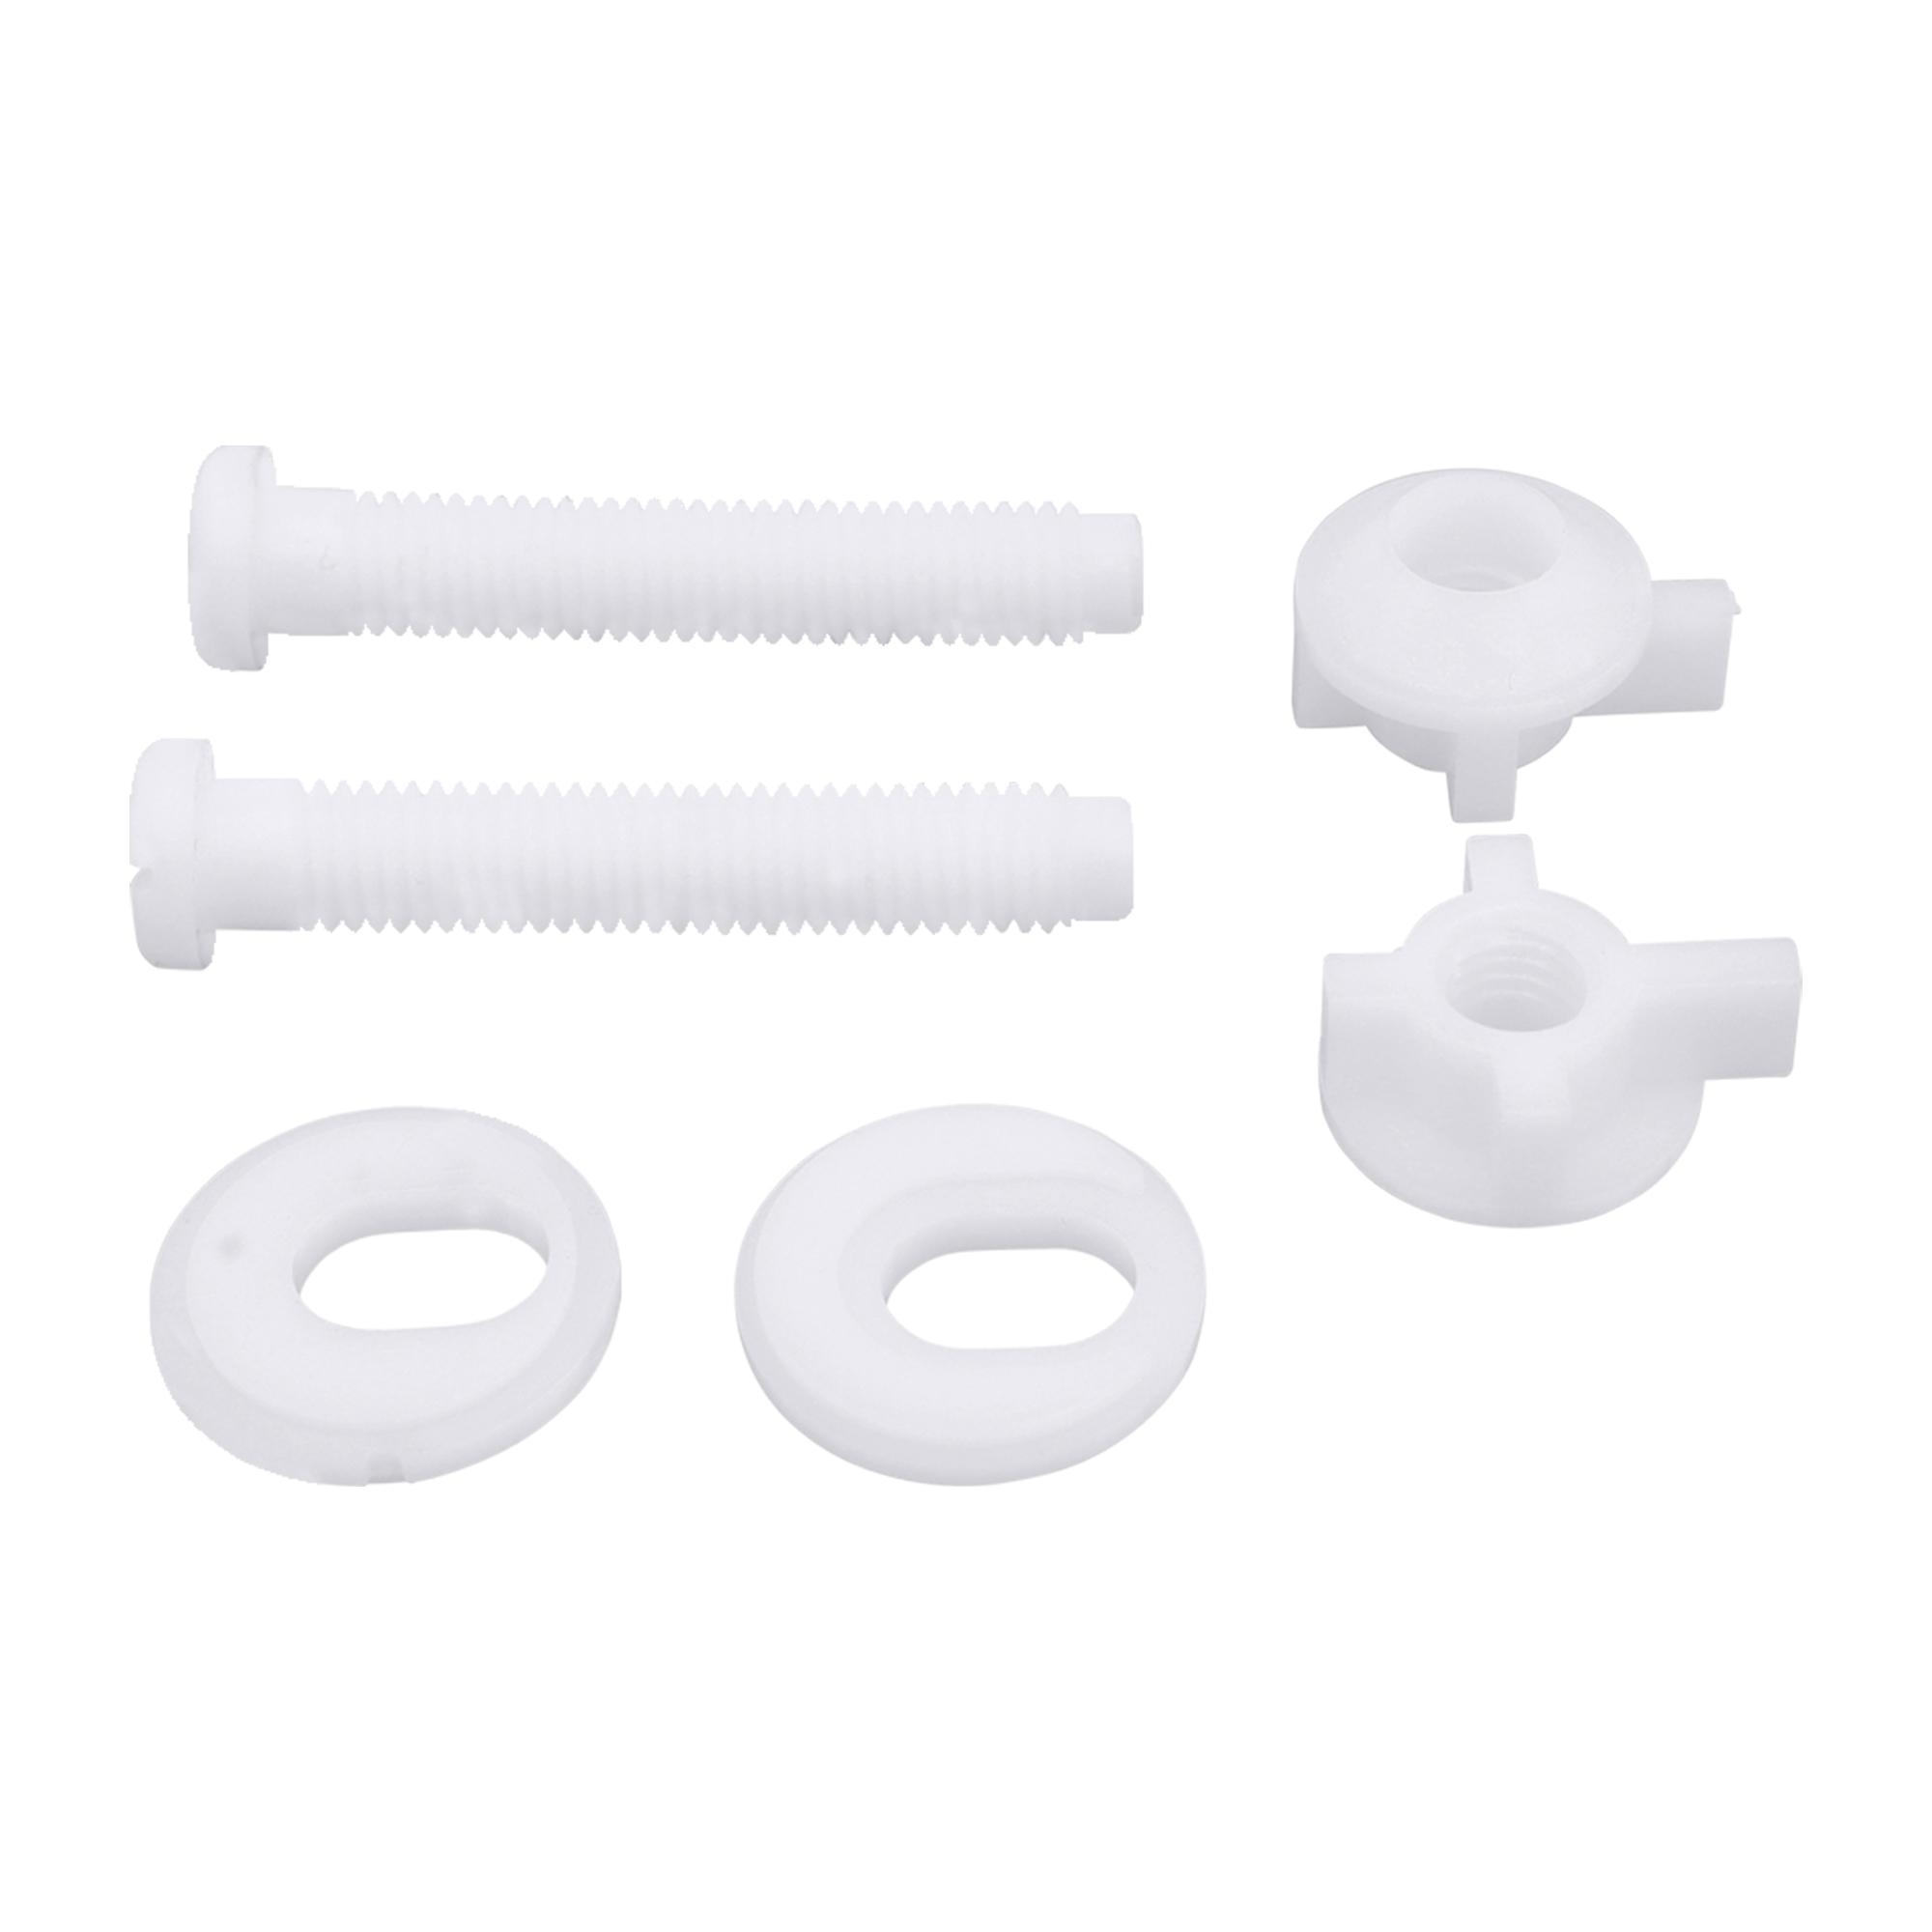 T3143 Hot Sale White Toilet Fix Connector Bolts Flexible for Fitting Cistern Replacement Kit